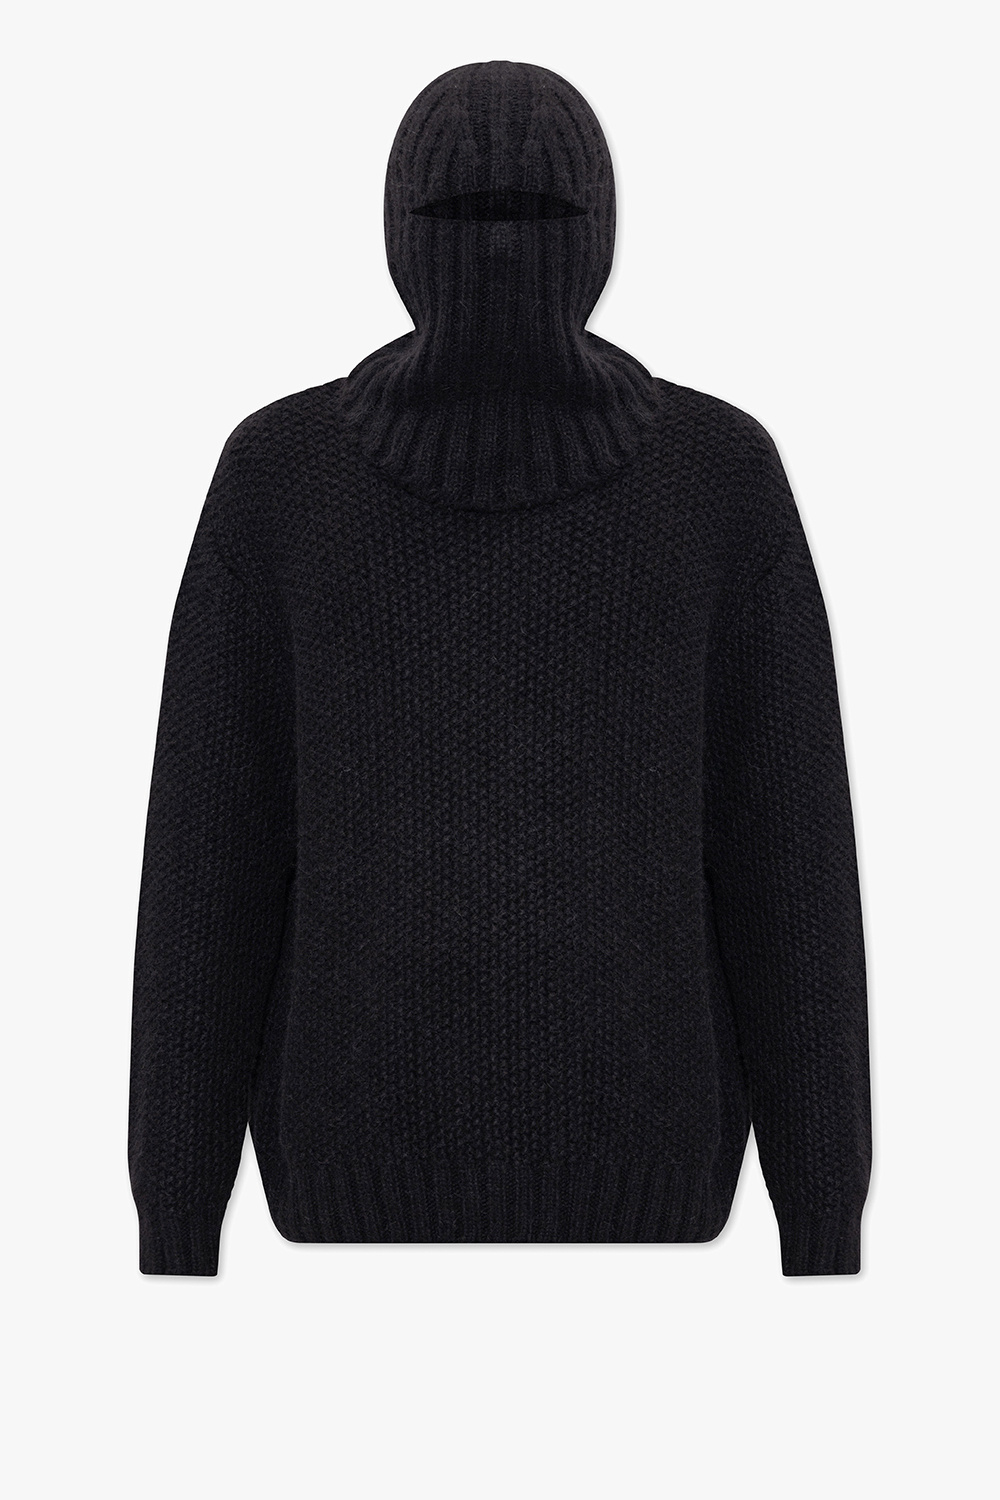 givenchy sweater Sweater with balaclava